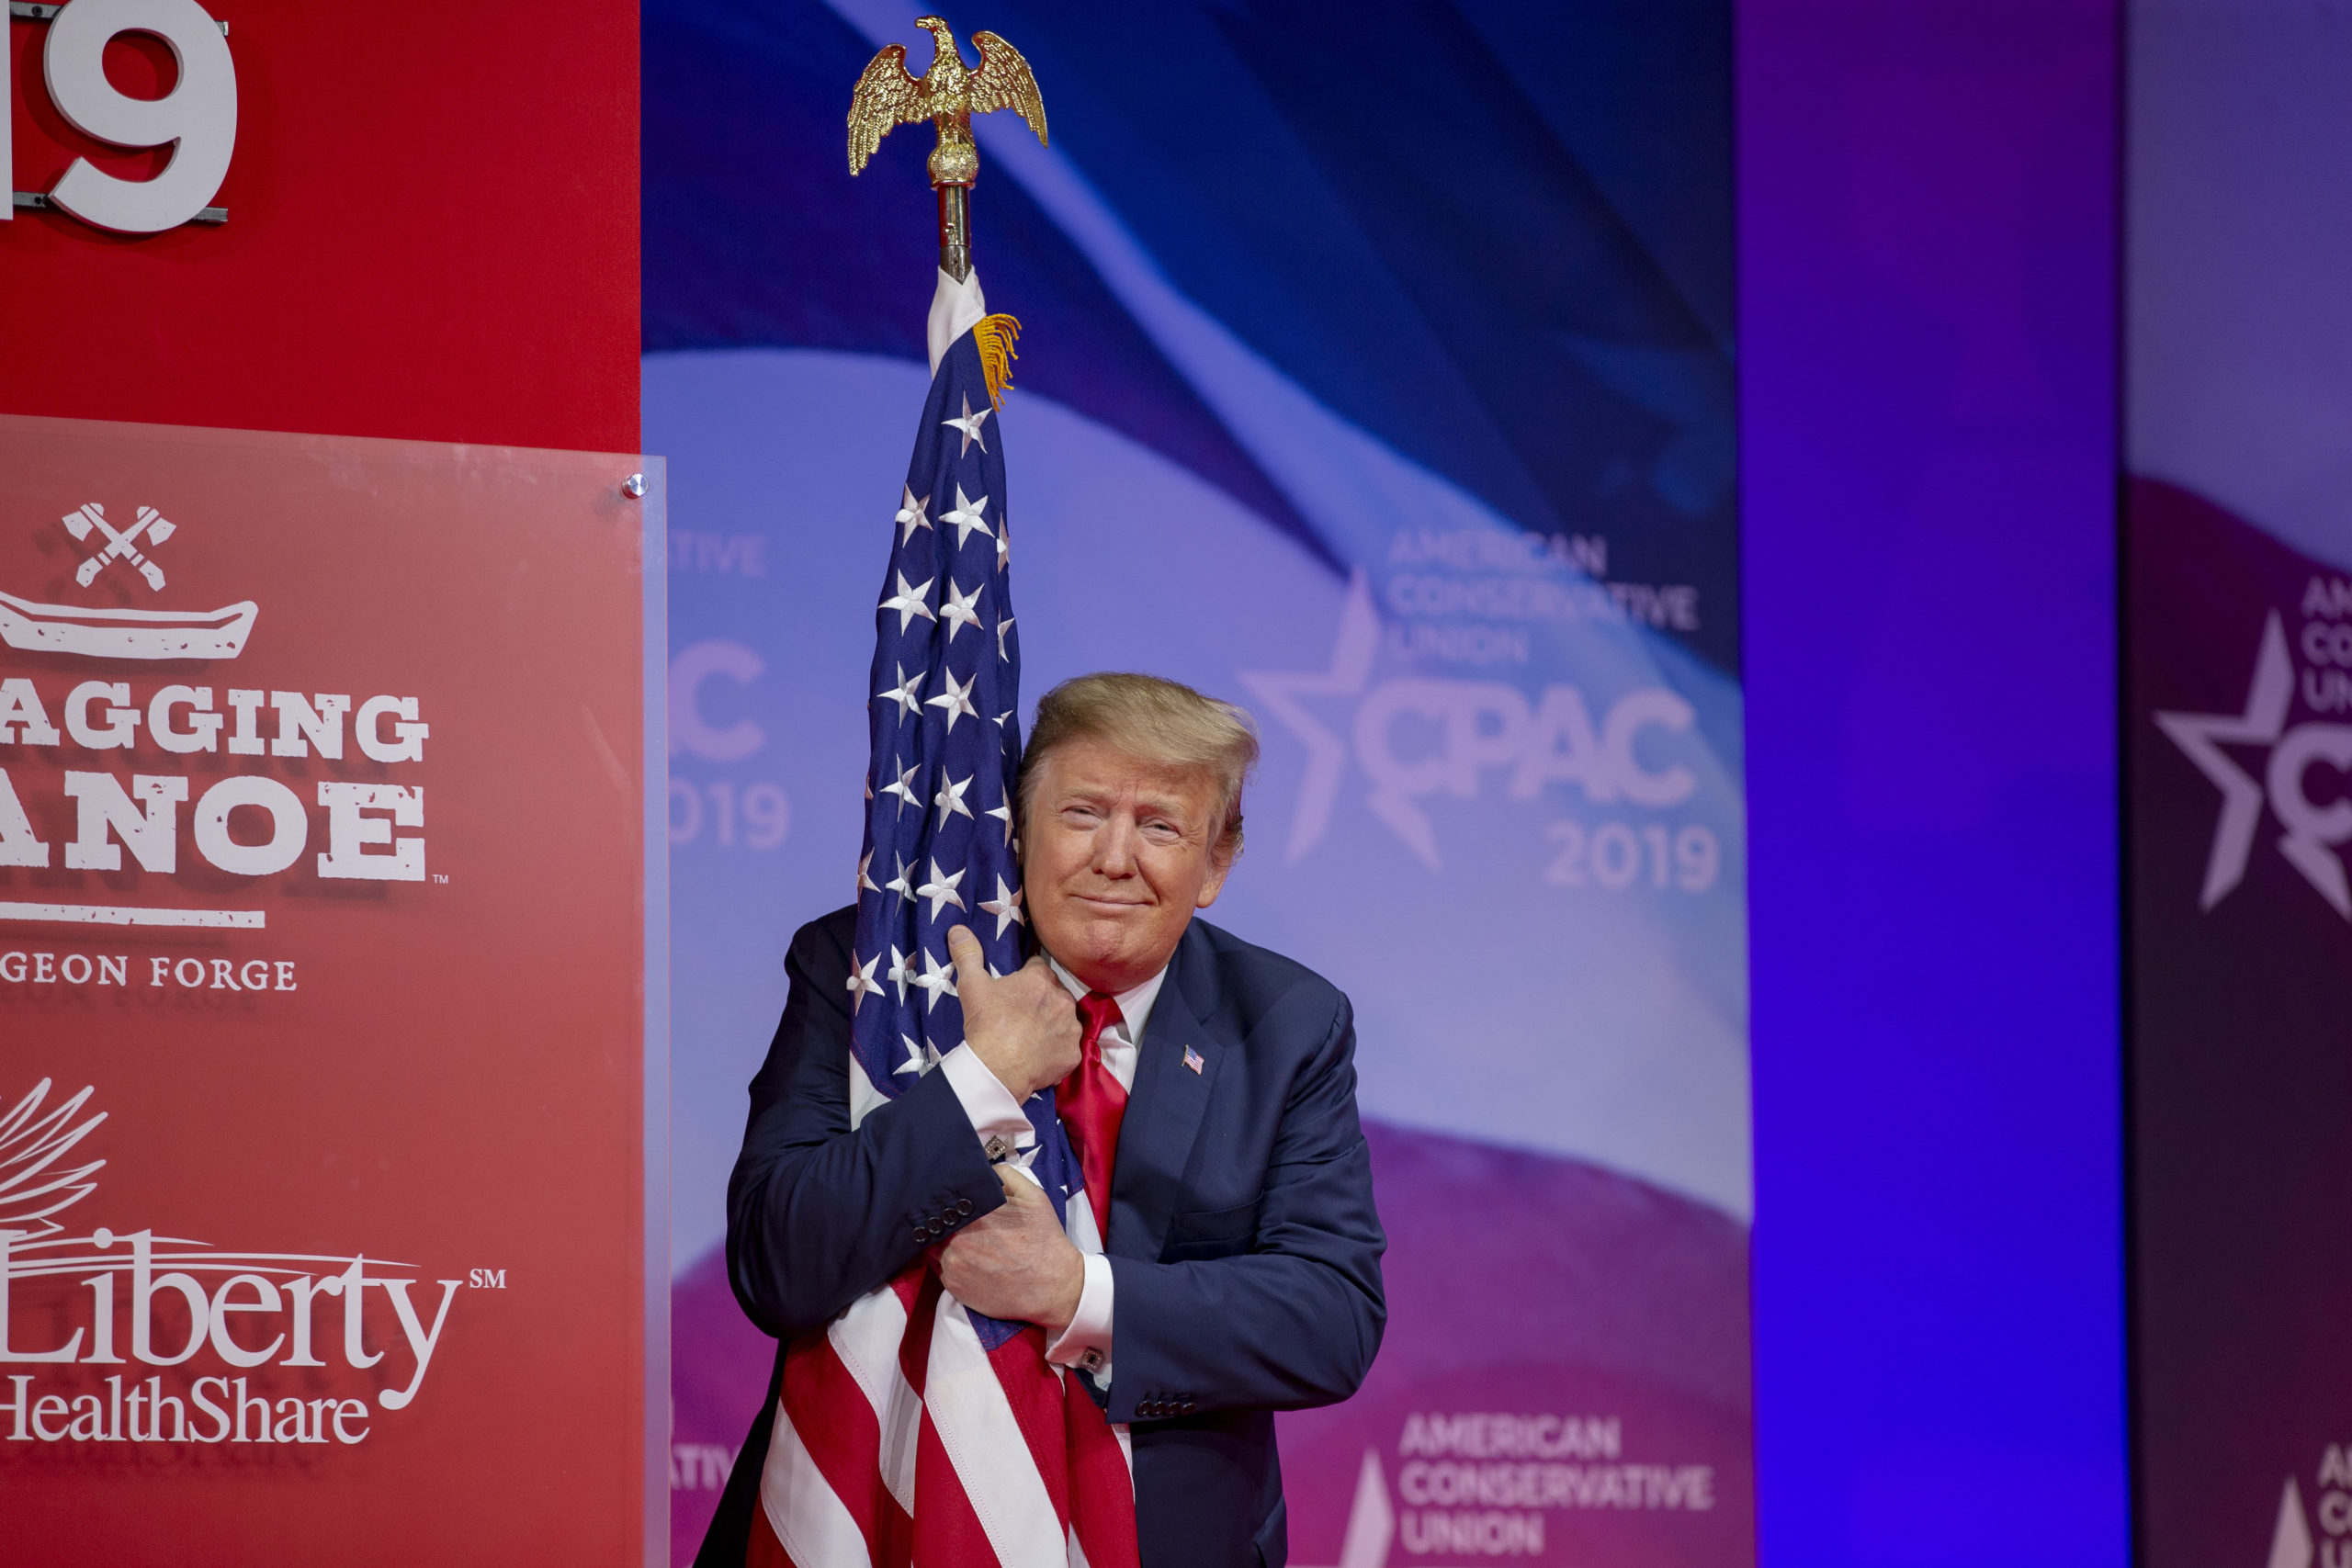 NATIONAL HARBOR, MD - MARCH 02: (AFP OUT) U.S. President Donald Trump hugs the U.S. flag during CPAC 2019 on March 02, 2019 in National Harbor, Maryland. The American Conservative Union hosts the annual Conservative Political Action Conference to discuss conservative agenda. (Photo by Tasos Katopodis/Getty Images)